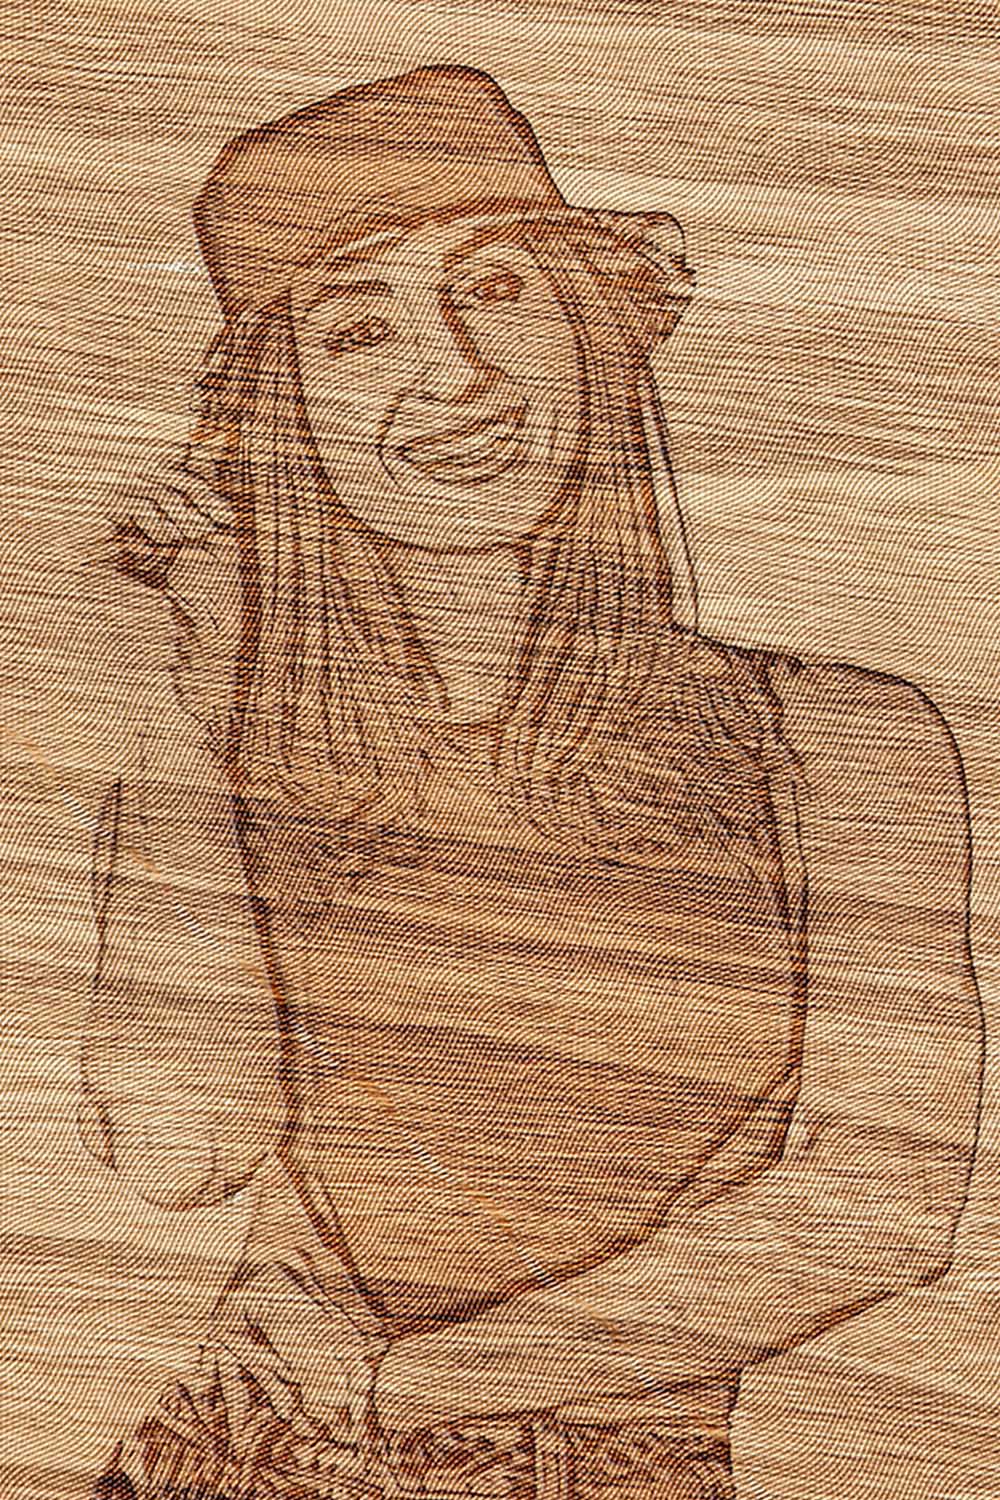 Wood Engraving Effect Photoshop Action pinterest preview image.